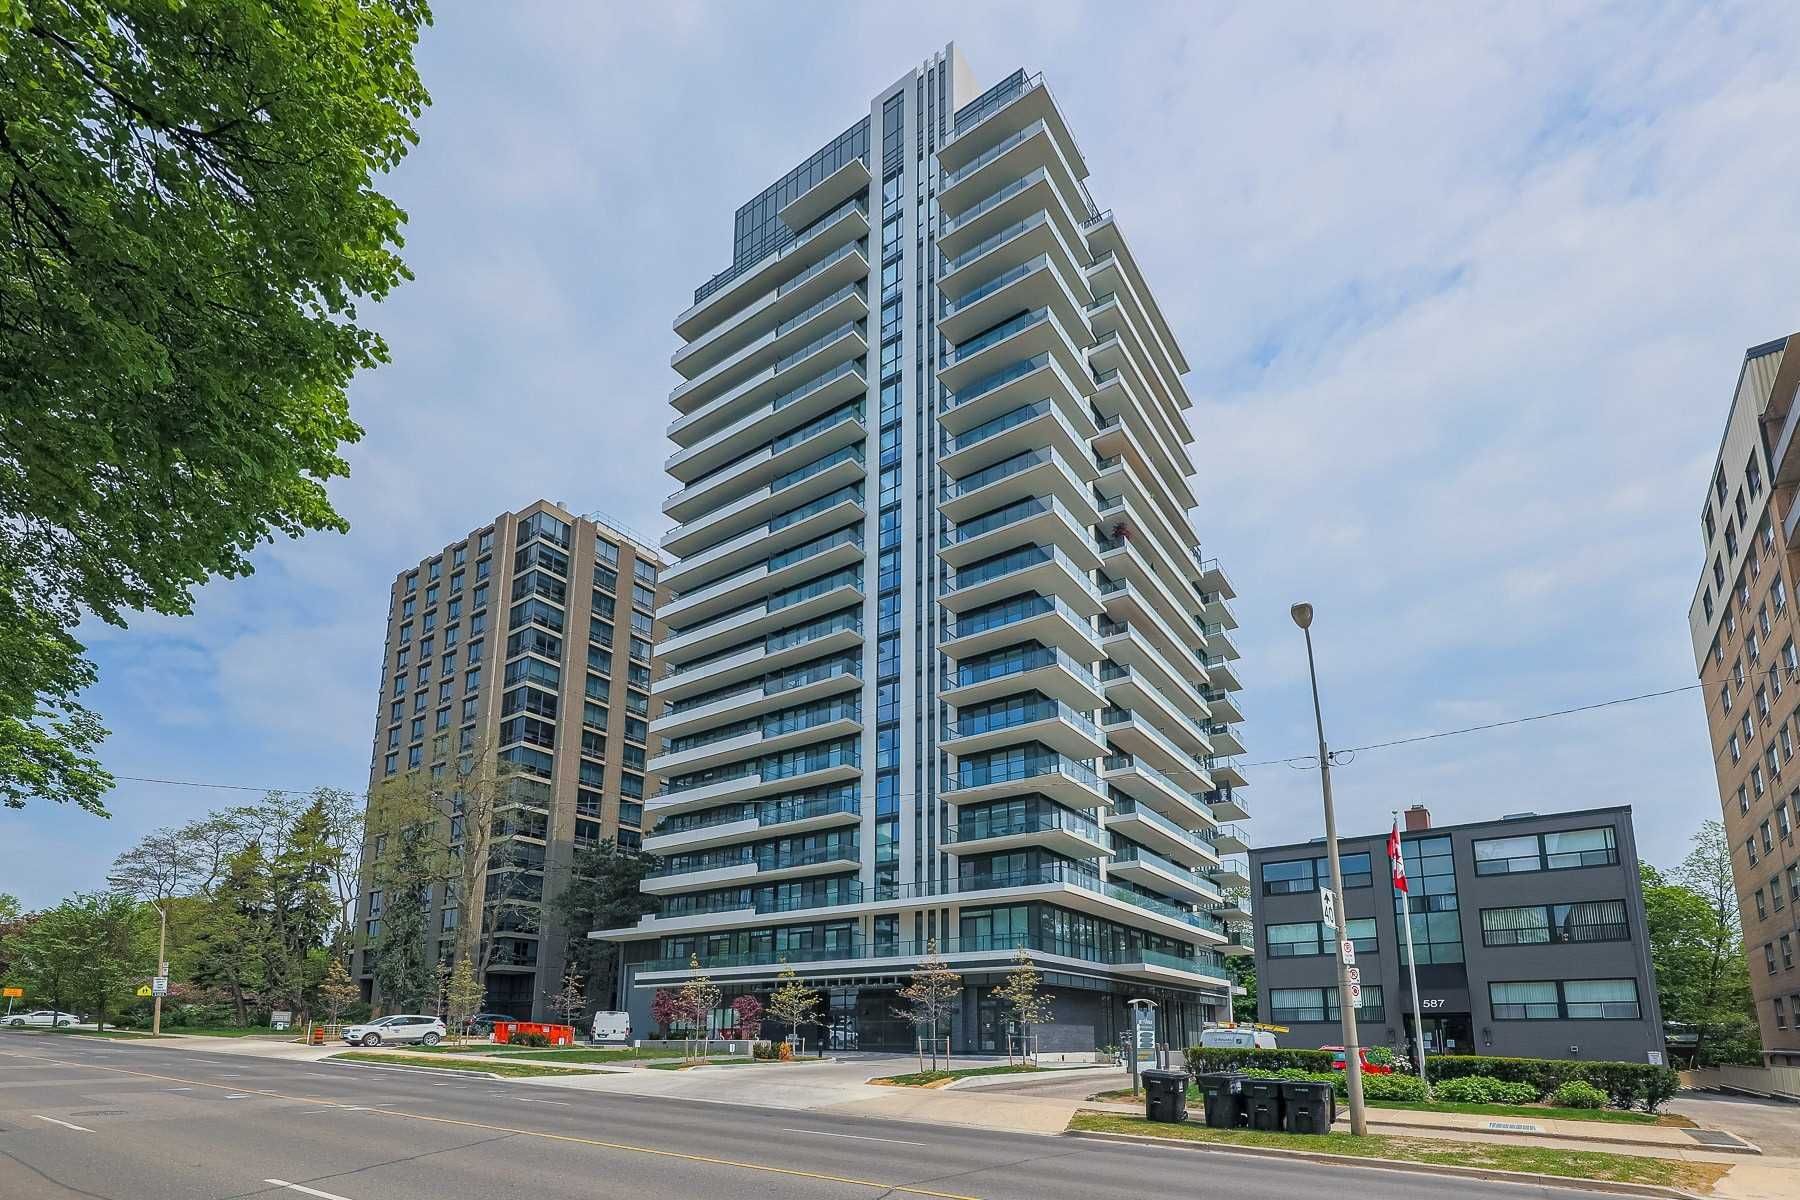 609 Avenue Rd. This condo at 609 Avenue Road Condos is located in  Midtown, Toronto - image #1 of 2 by Strata.ca